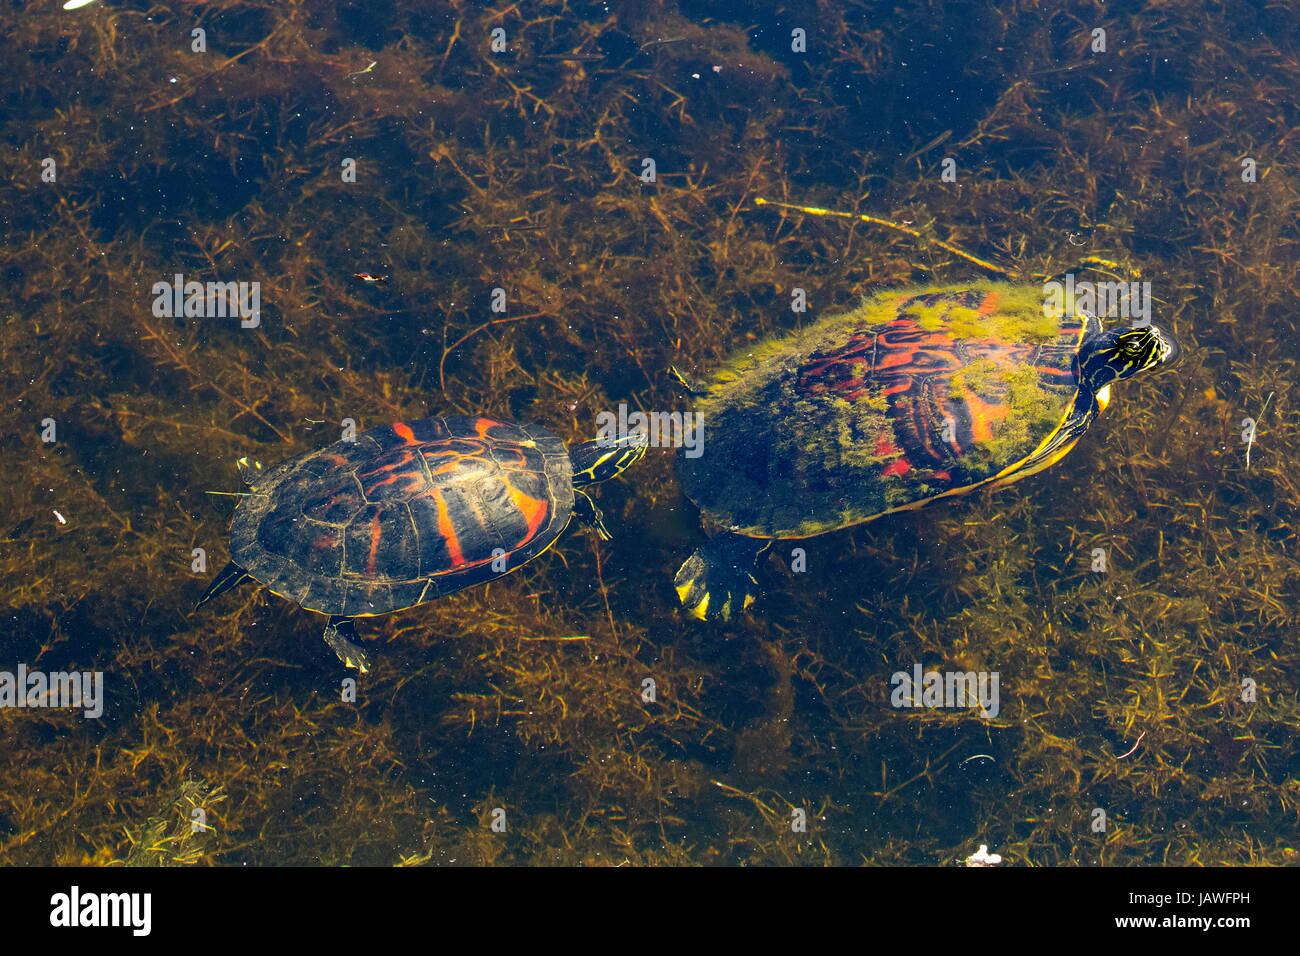 A pair of Florida red bellied cooters, Pseudemys nelsoni. Stock Photo